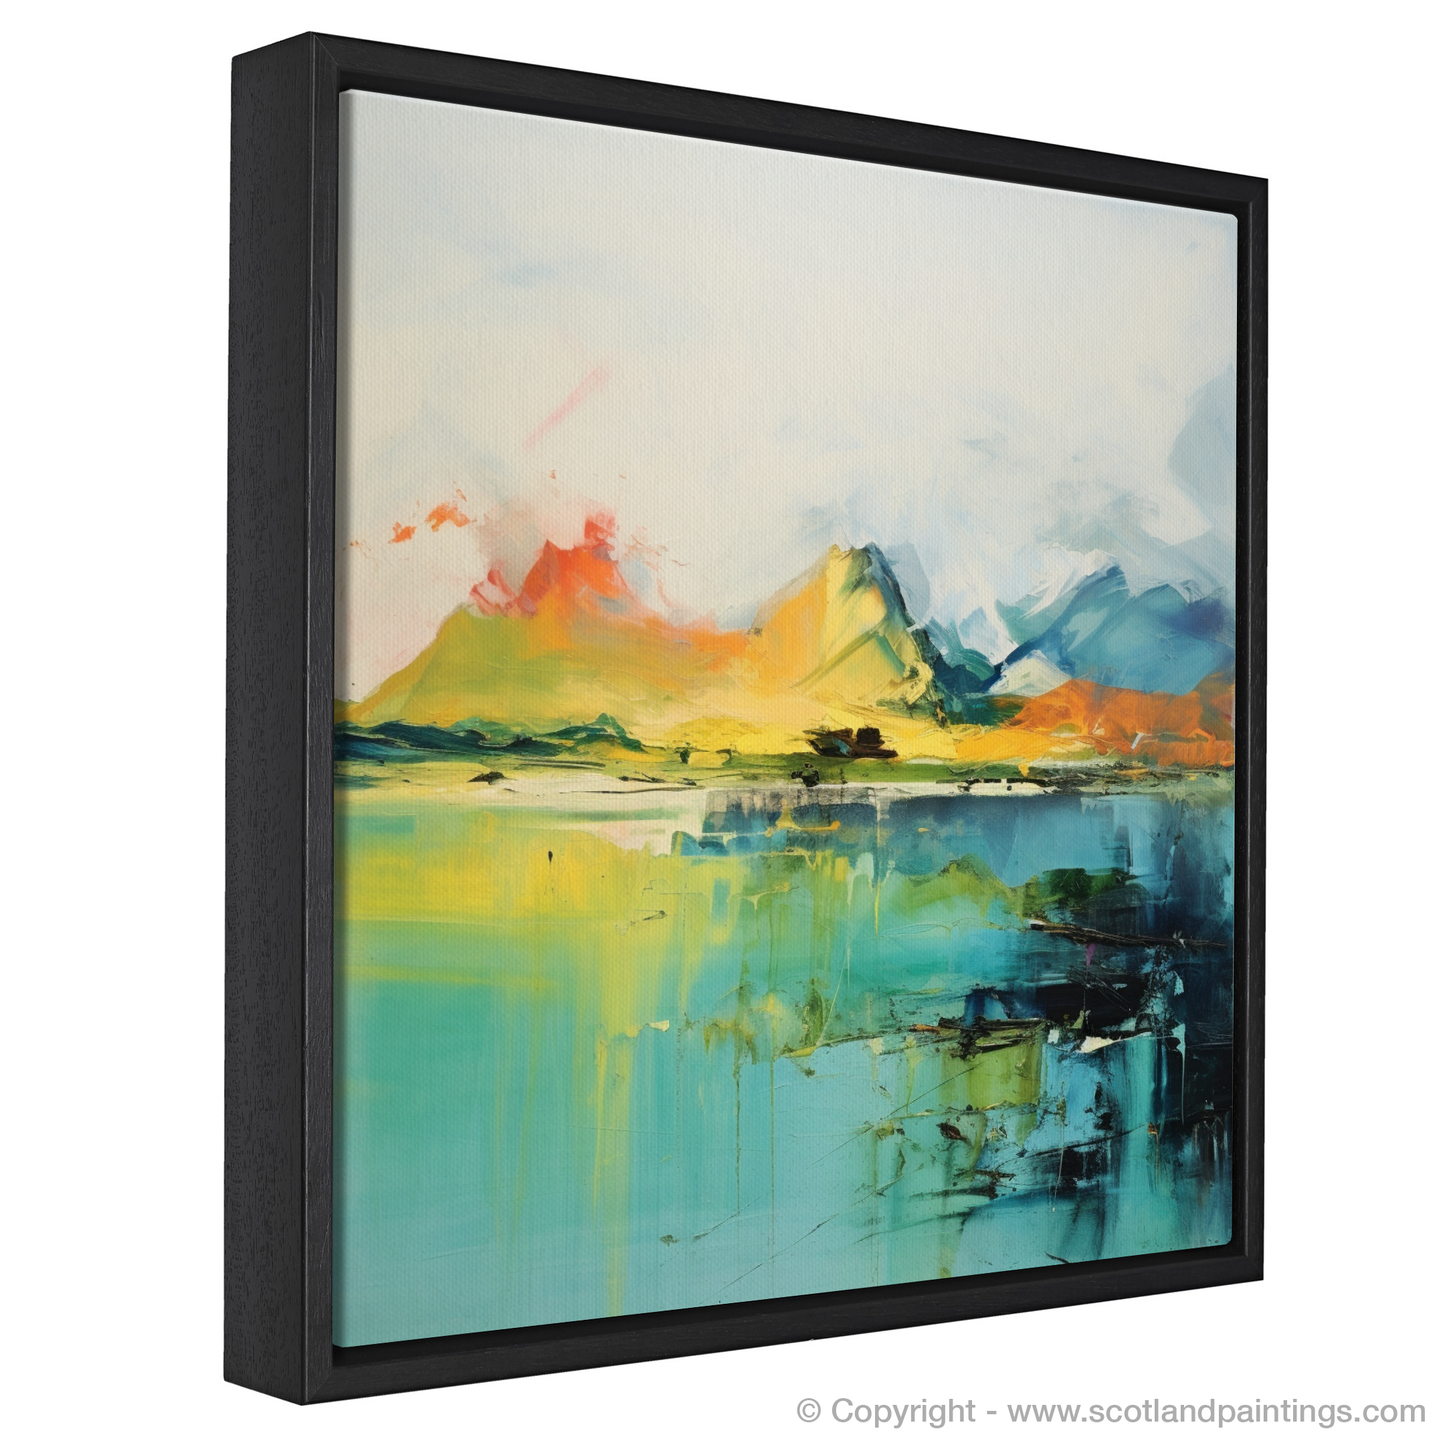 Painting and Art Print of Isle of Raasay, Inner Hebrides in summer entitled "Summer Rhapsody: An Abstract Ode to Raasay".